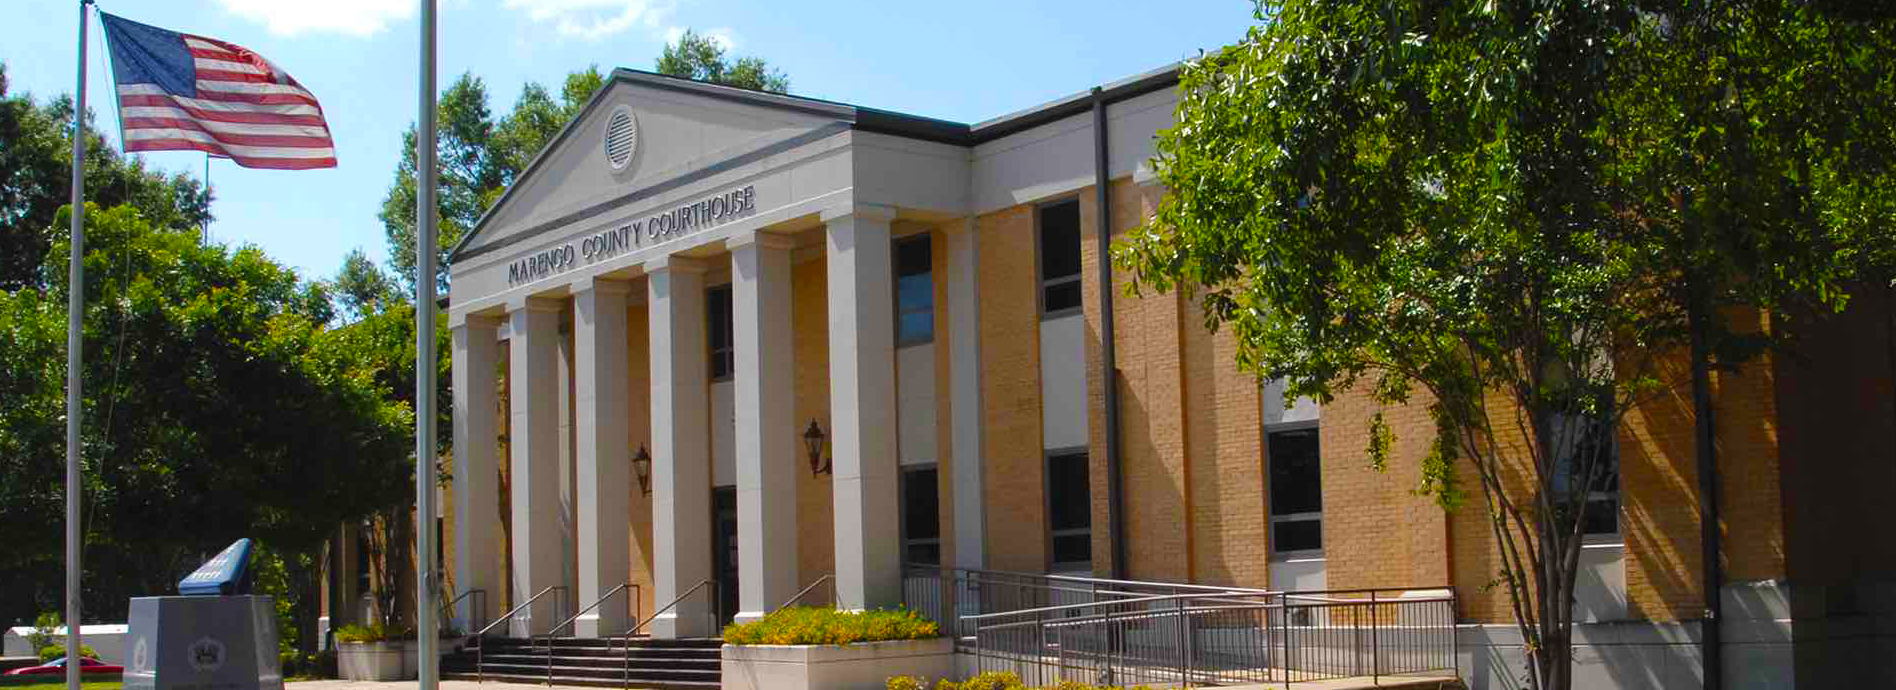 Image of Marengo County Probate Office Marengo County Courthouse